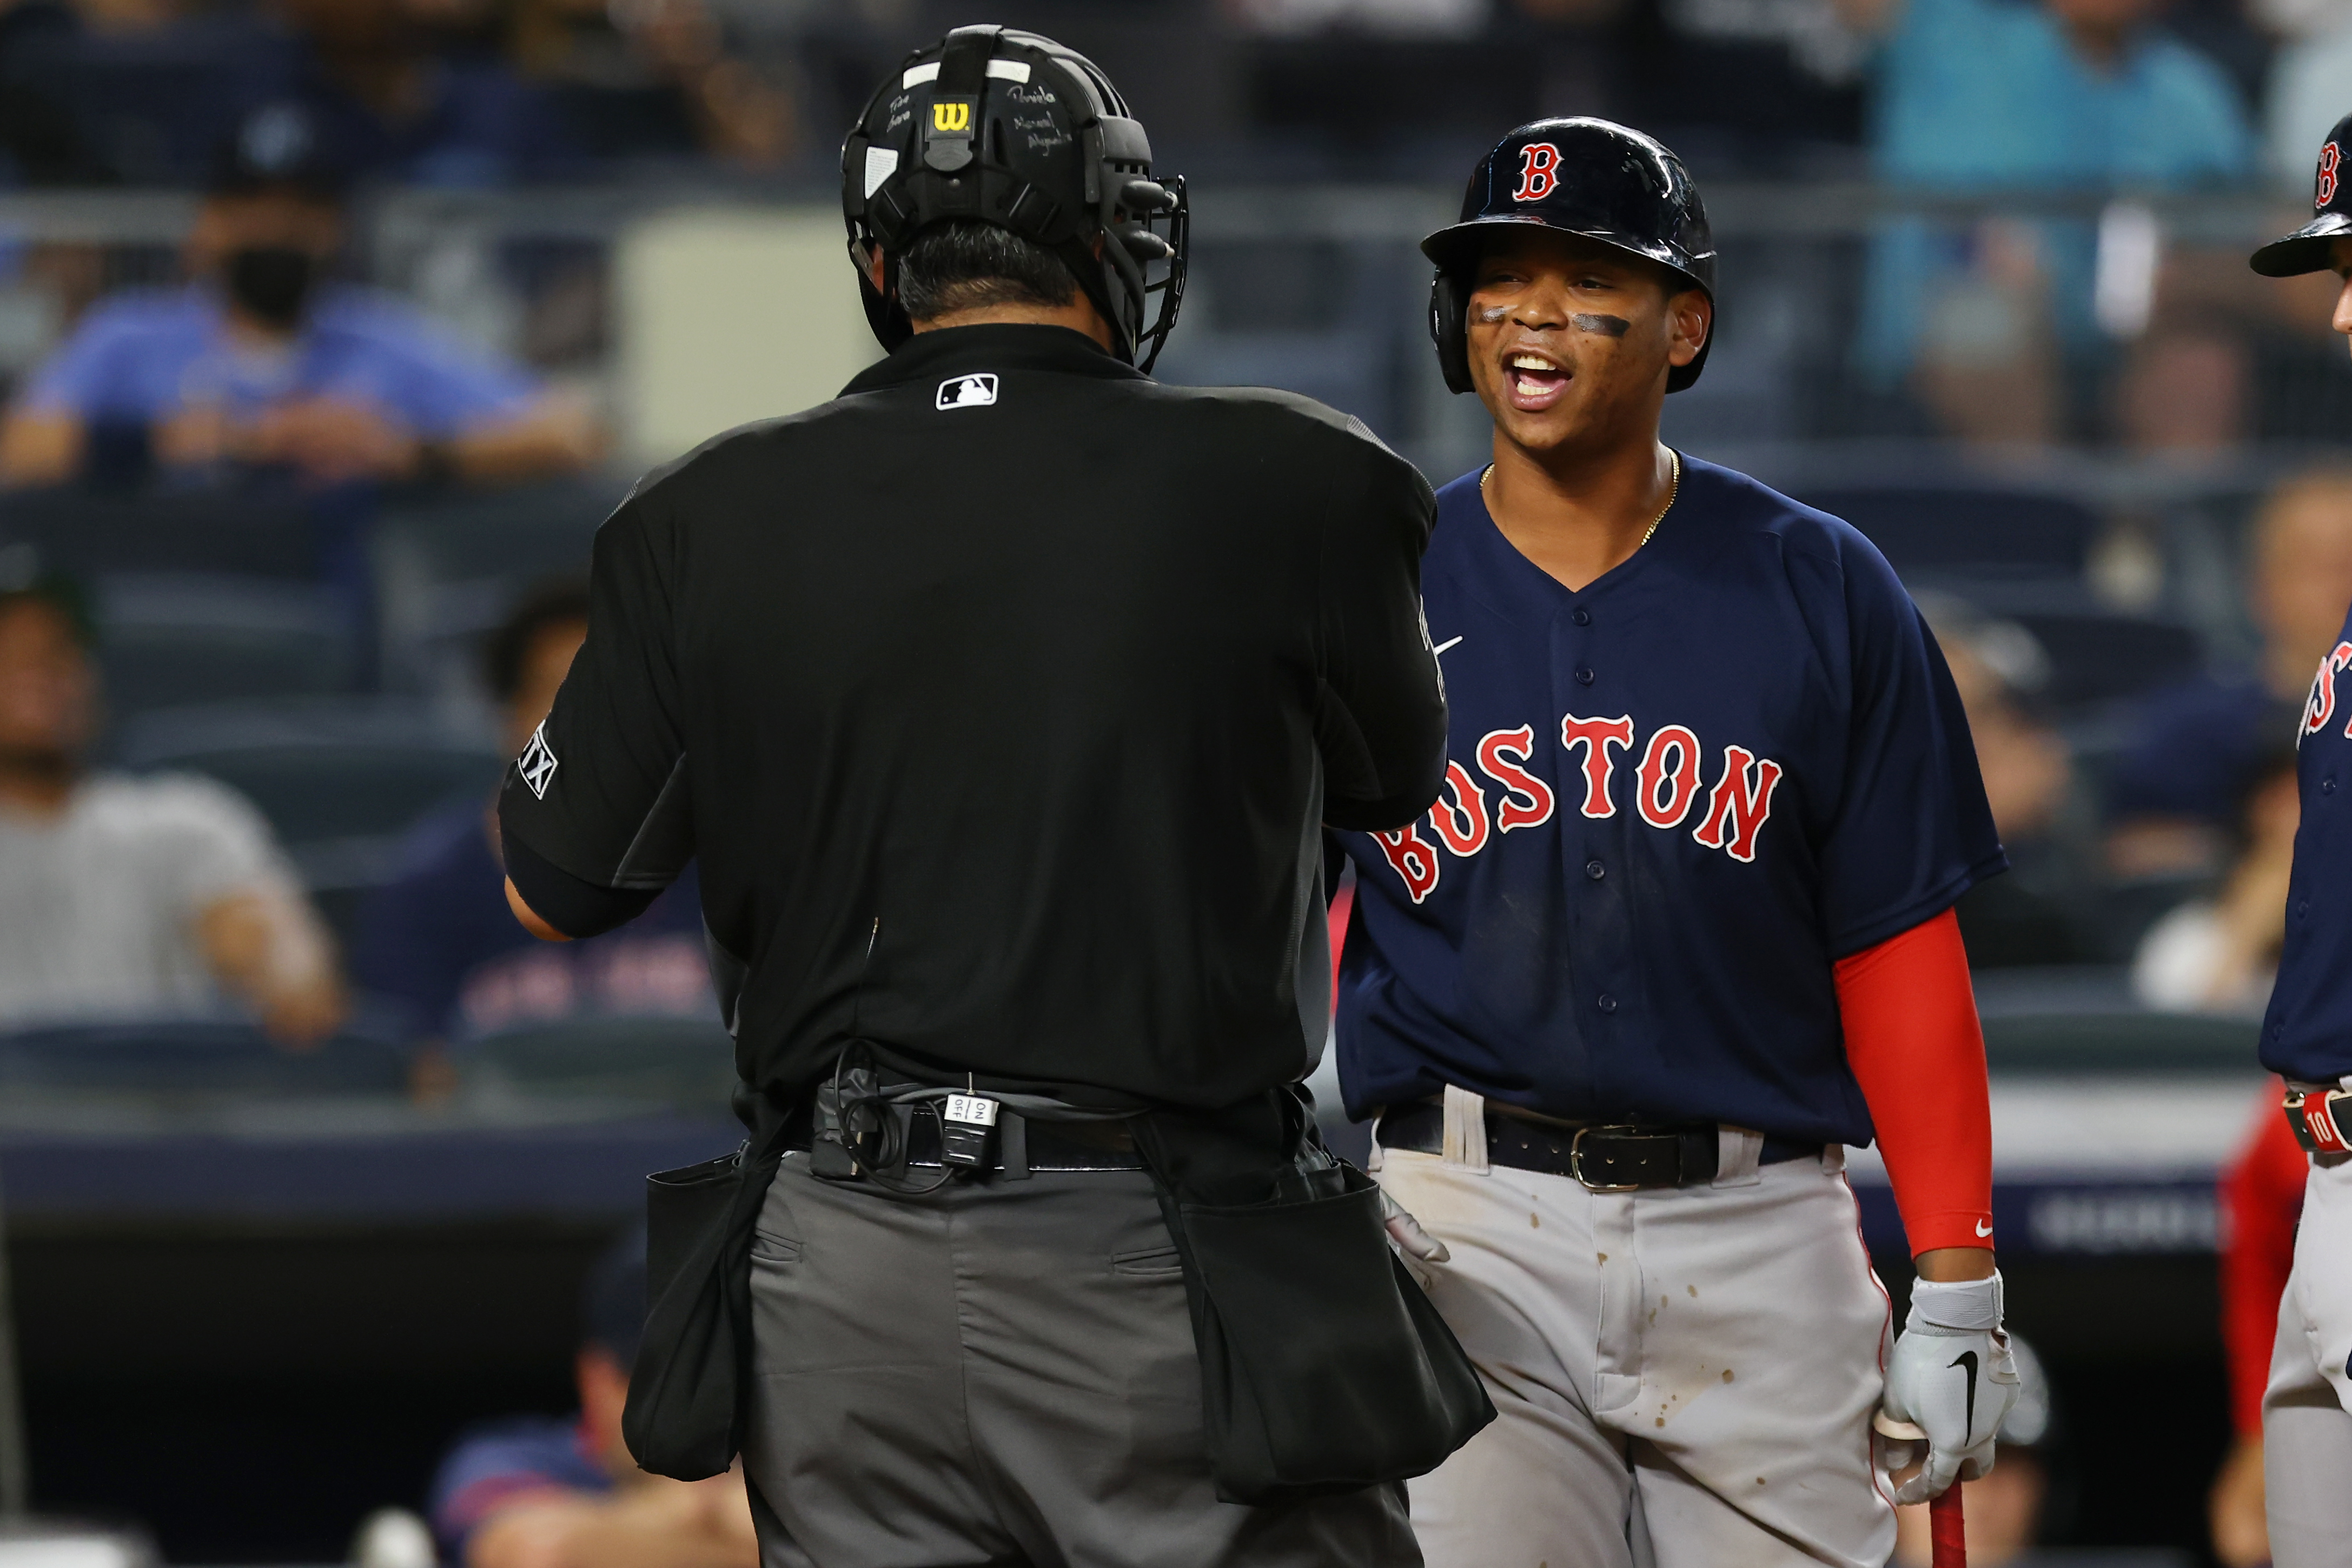 Fan who hit Red Sox player with ball gets lifetime ban from all parks